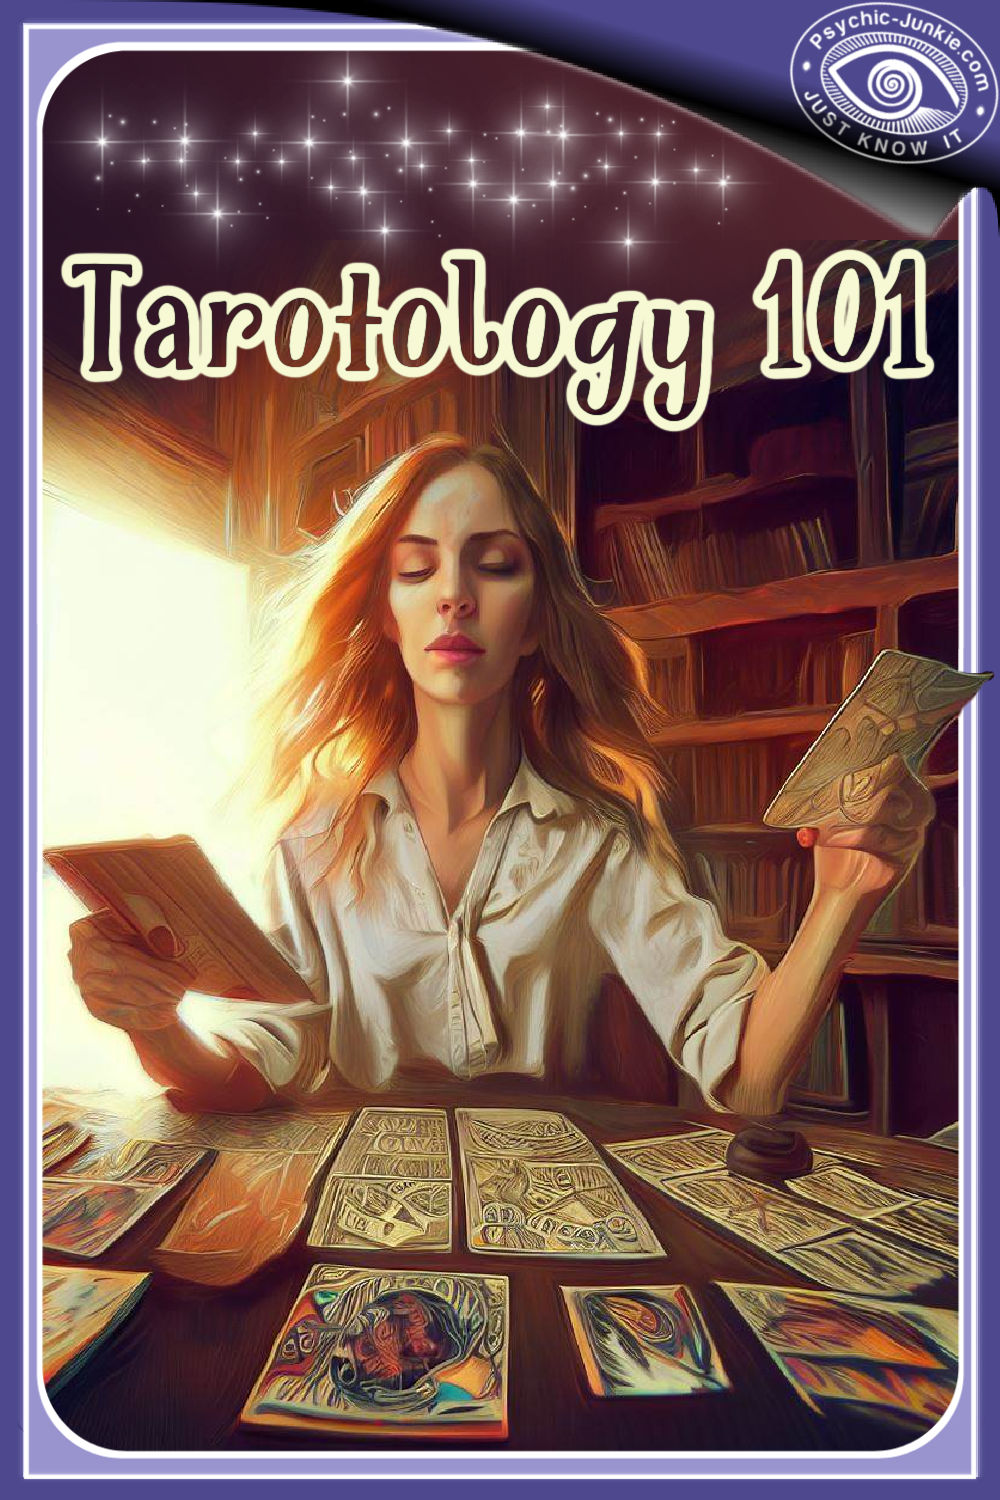 Tarotology - How Is Your Future Seen In The Cards?